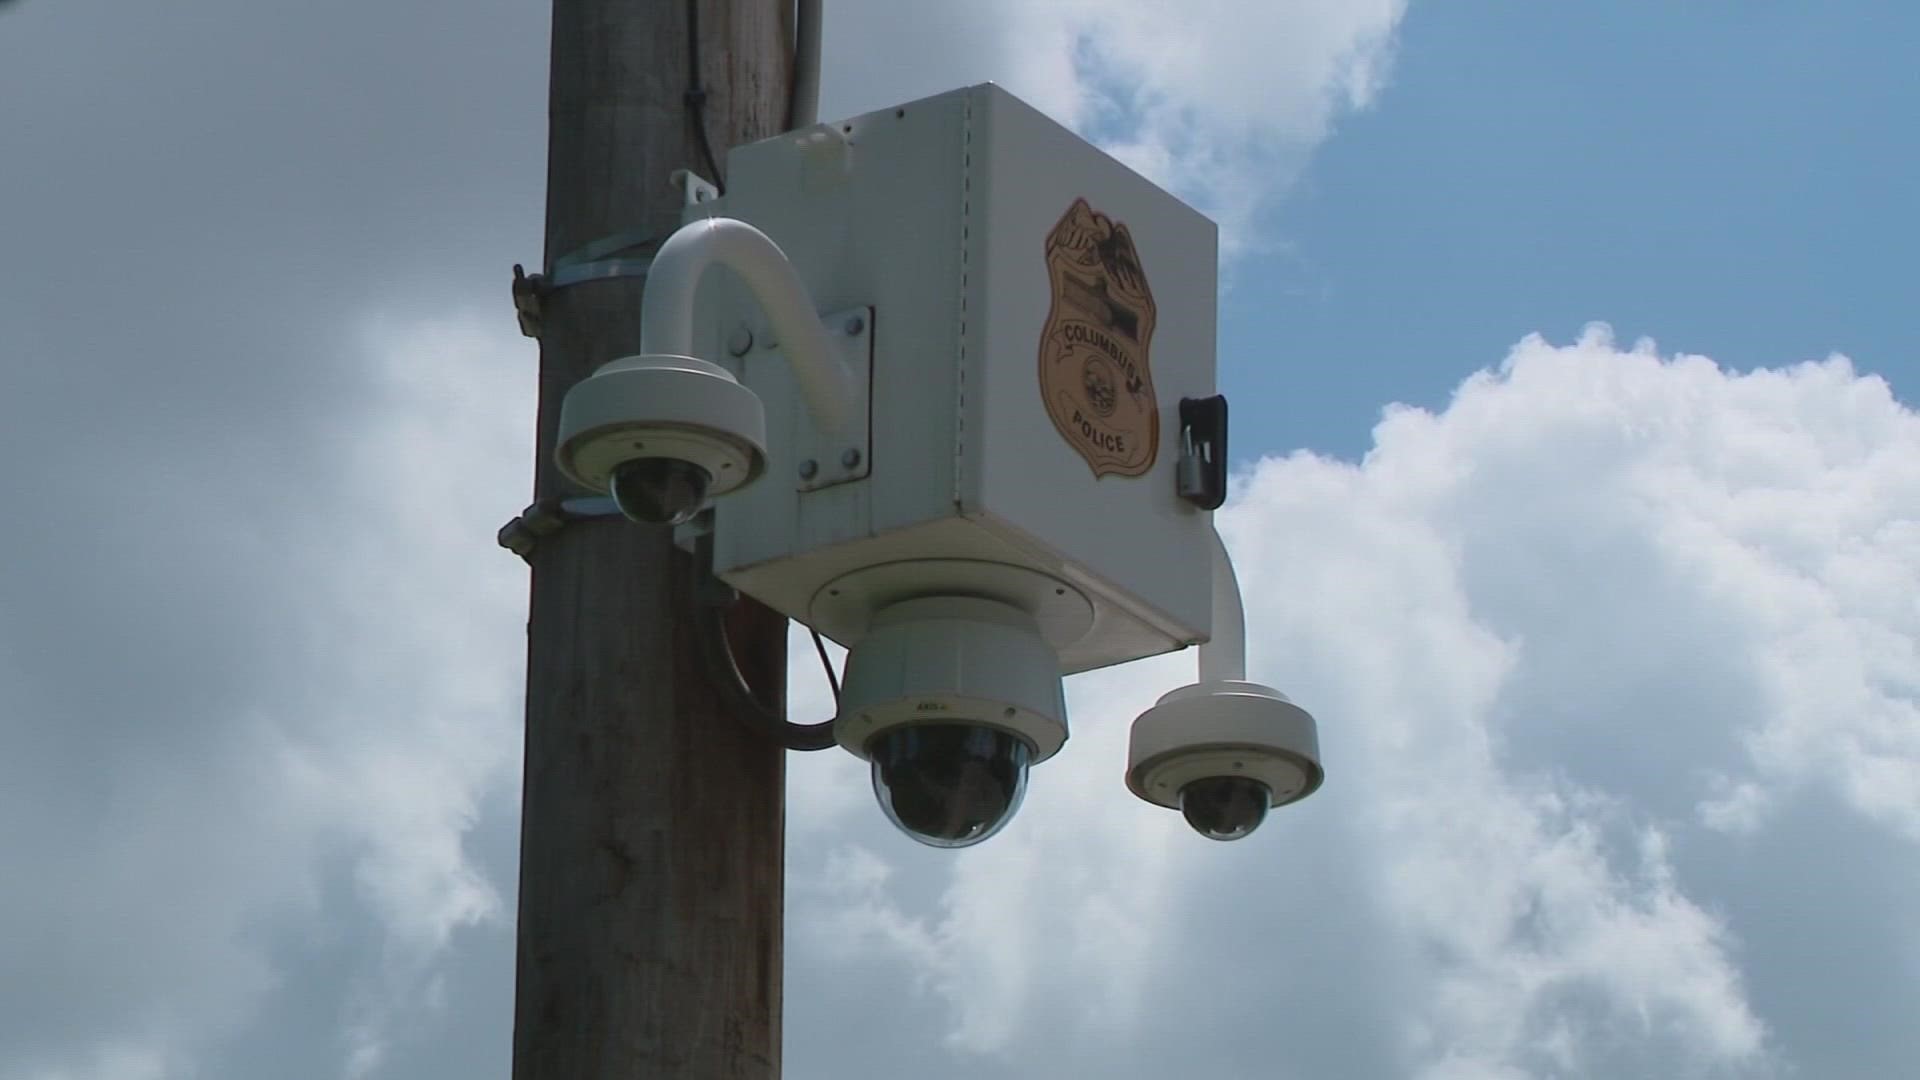 In June, Columbus City Council approved funding for 25 cameras throughout city parks.